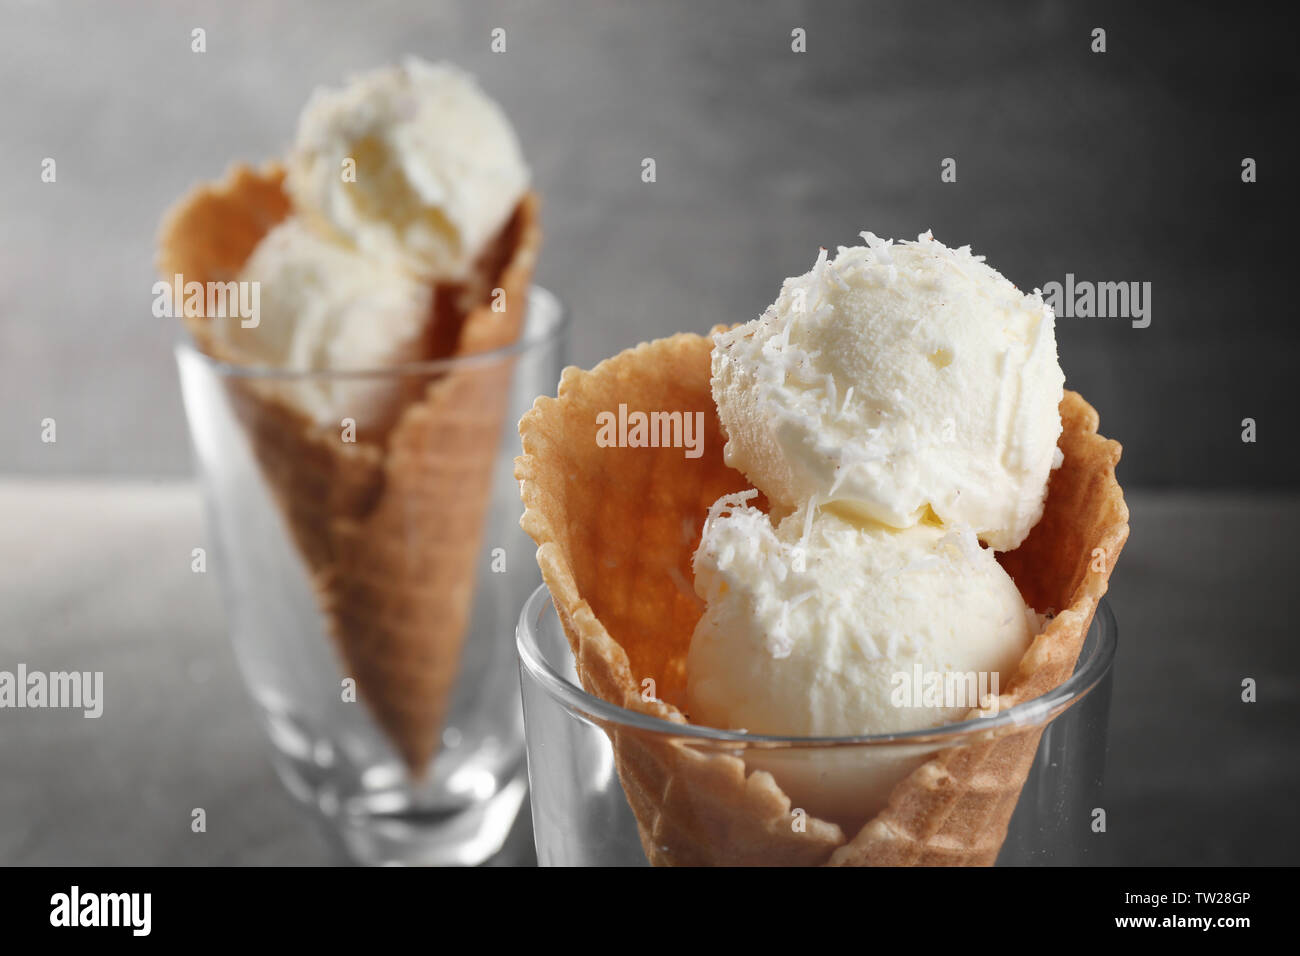 Glasses with waffle cones and balls of coconut ice cream on grunge background Stock Photo